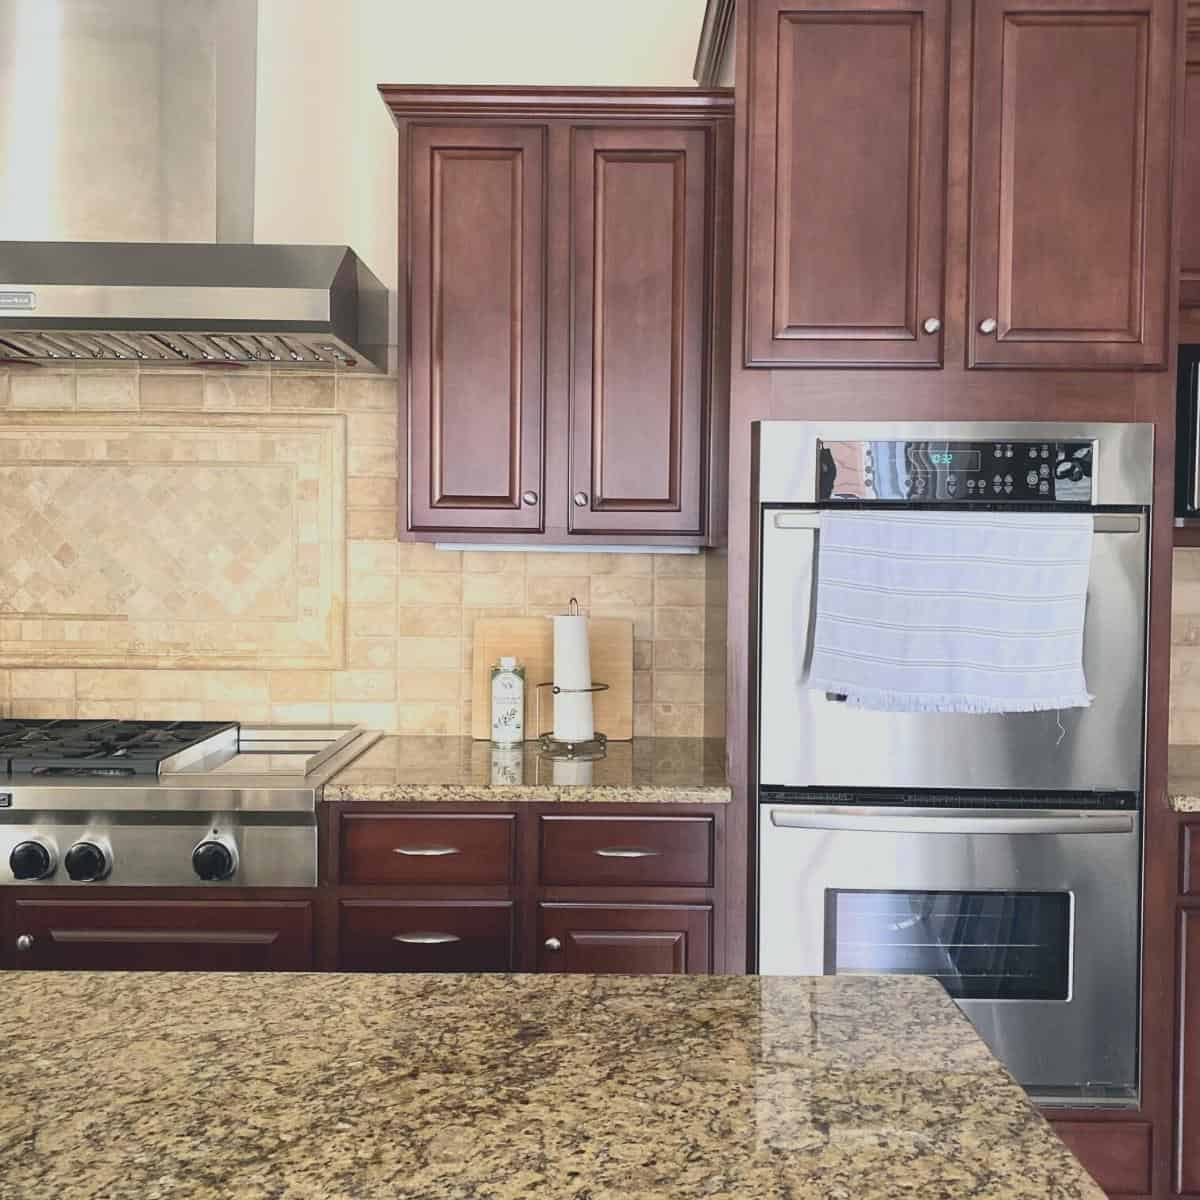 Image showing kitchen with cabinets that do not go all the way to the ceiling